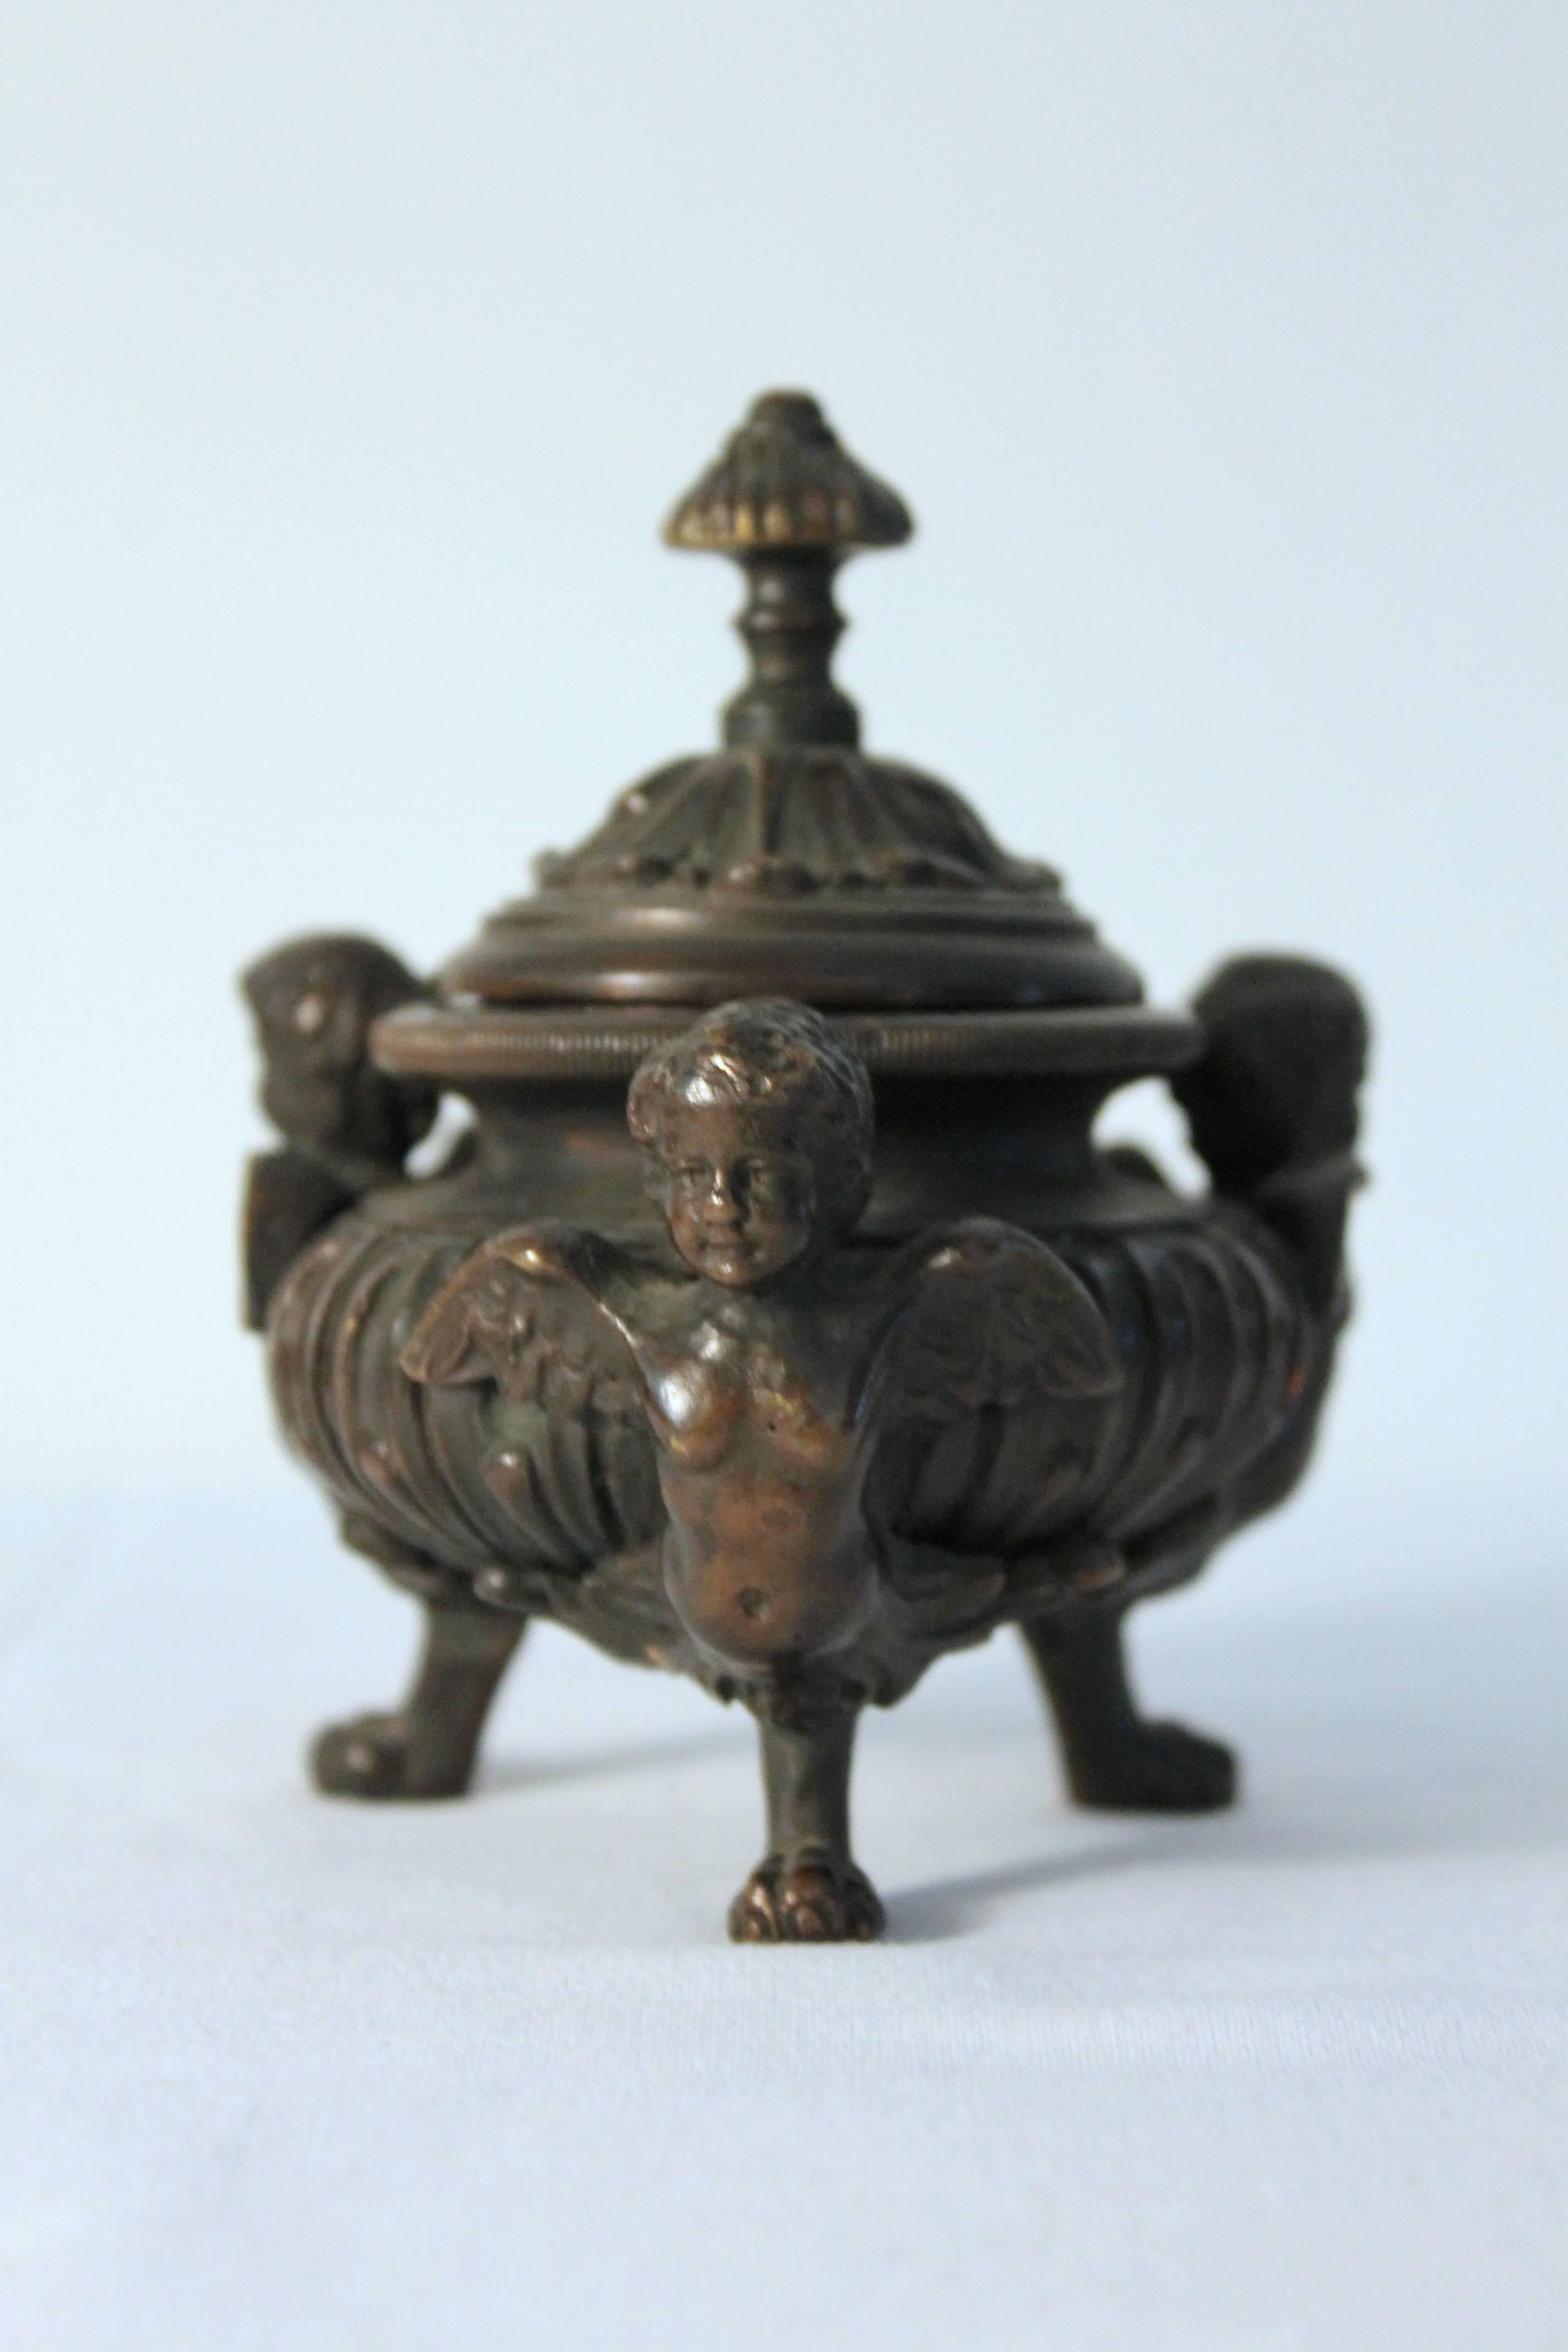 Bronze inkwell dated circa 1880, angels subject supported by feline paws.
Ink bowl in glass with bronze profile and 